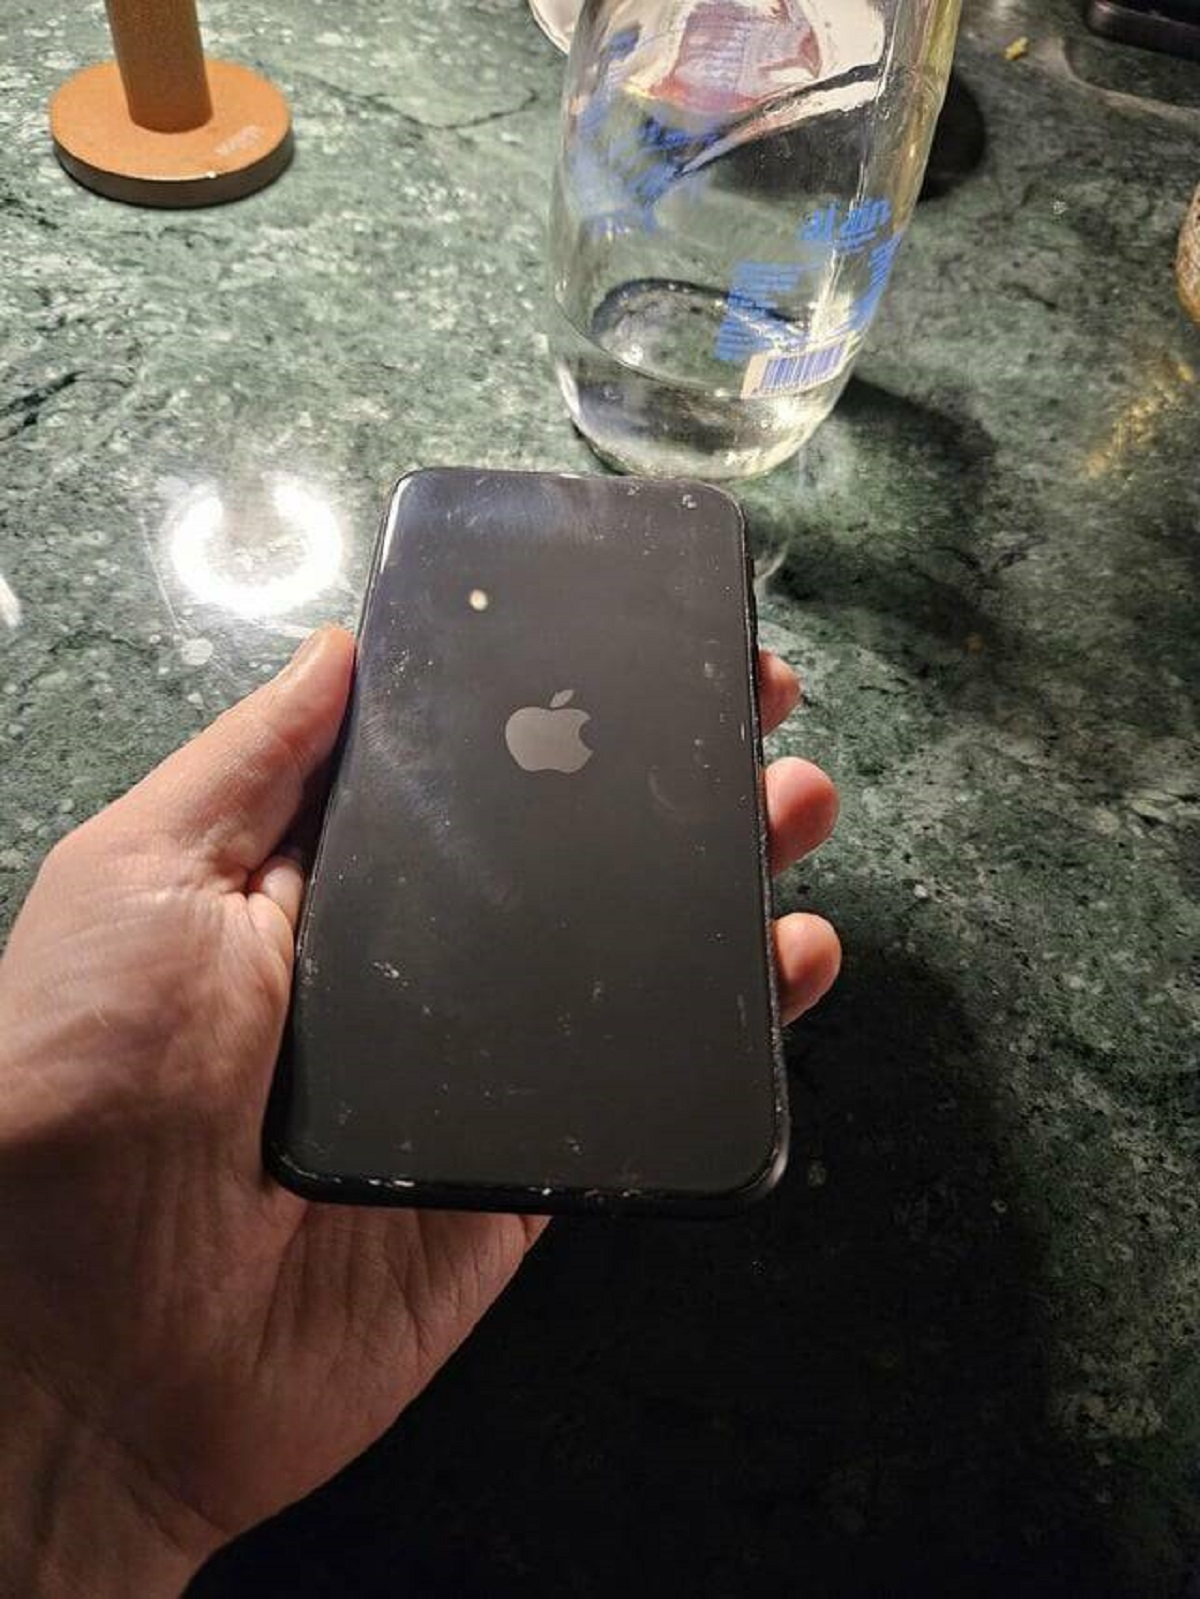 "A camera-less iPhone issued to my buddy that works at a Nuclear Plant. No cameras allowed."